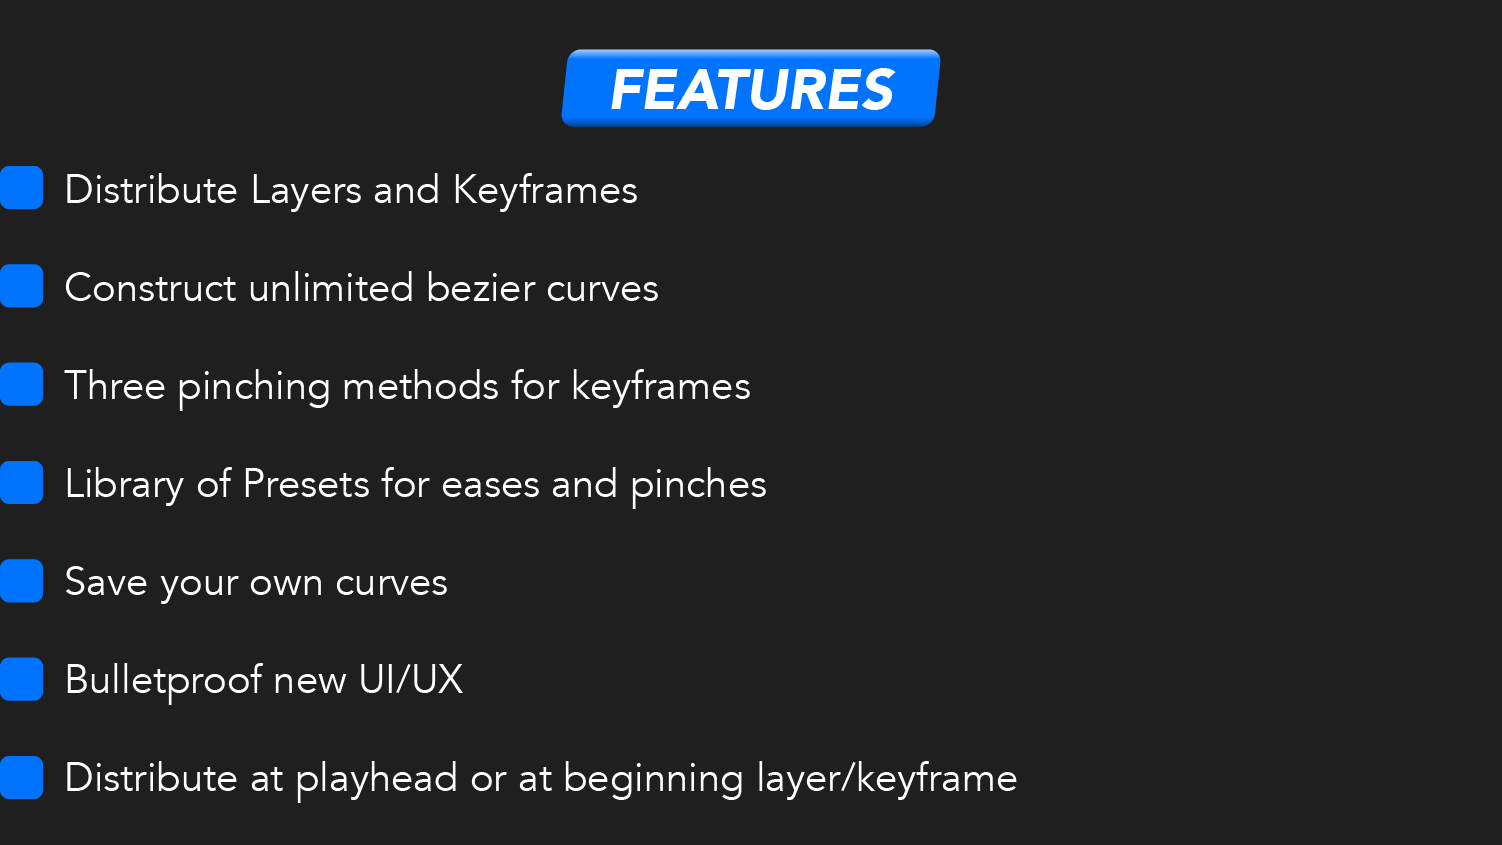 Features: Distribute layers and keyframes, construct unlimited bezier curves, three pinching methods for keyframes, library of presets for eases and pinches, save your own curves, bulletproof new UI/UX, distribute at playhead or at beginning of layer/keyframe.